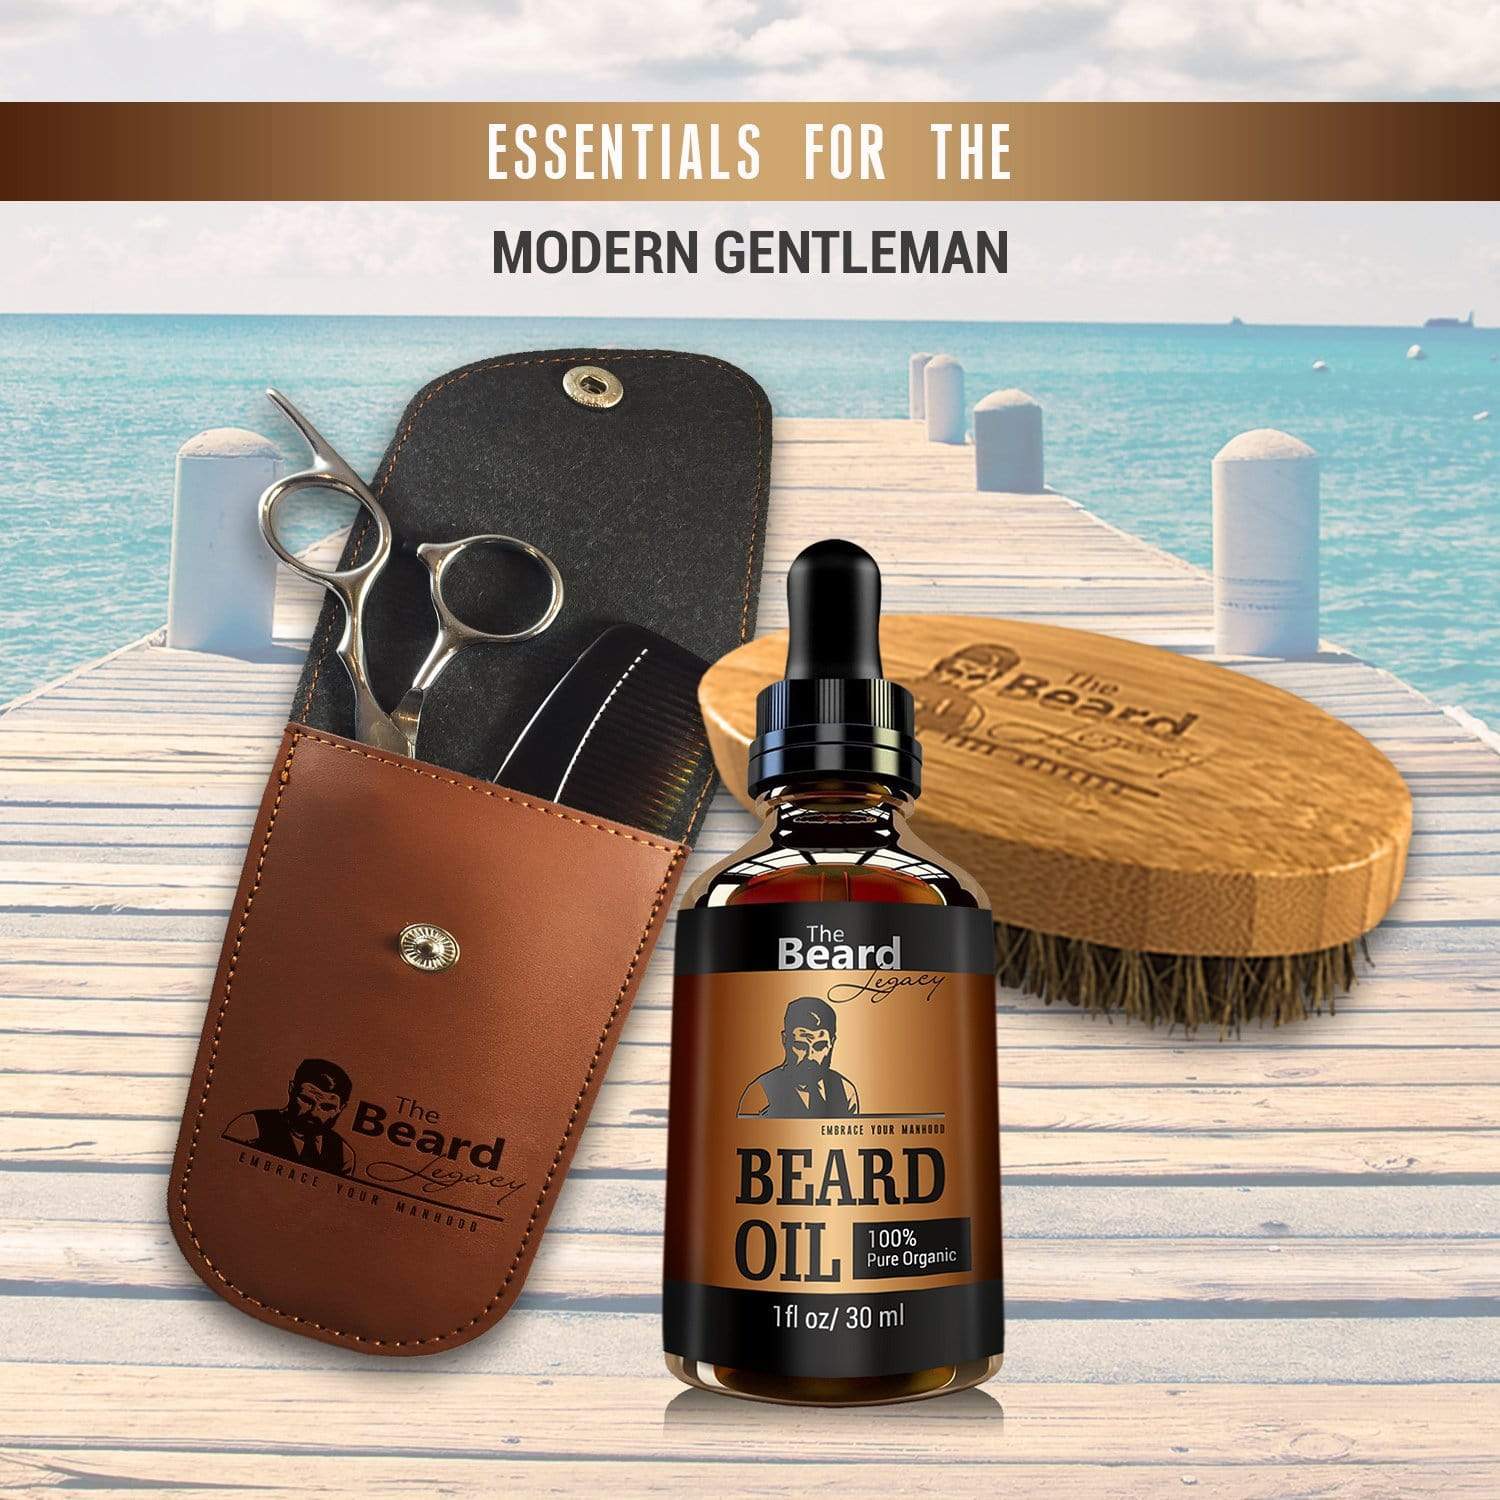 The Beard Legacy A Complete Beard Grooming Kit For Men 1725